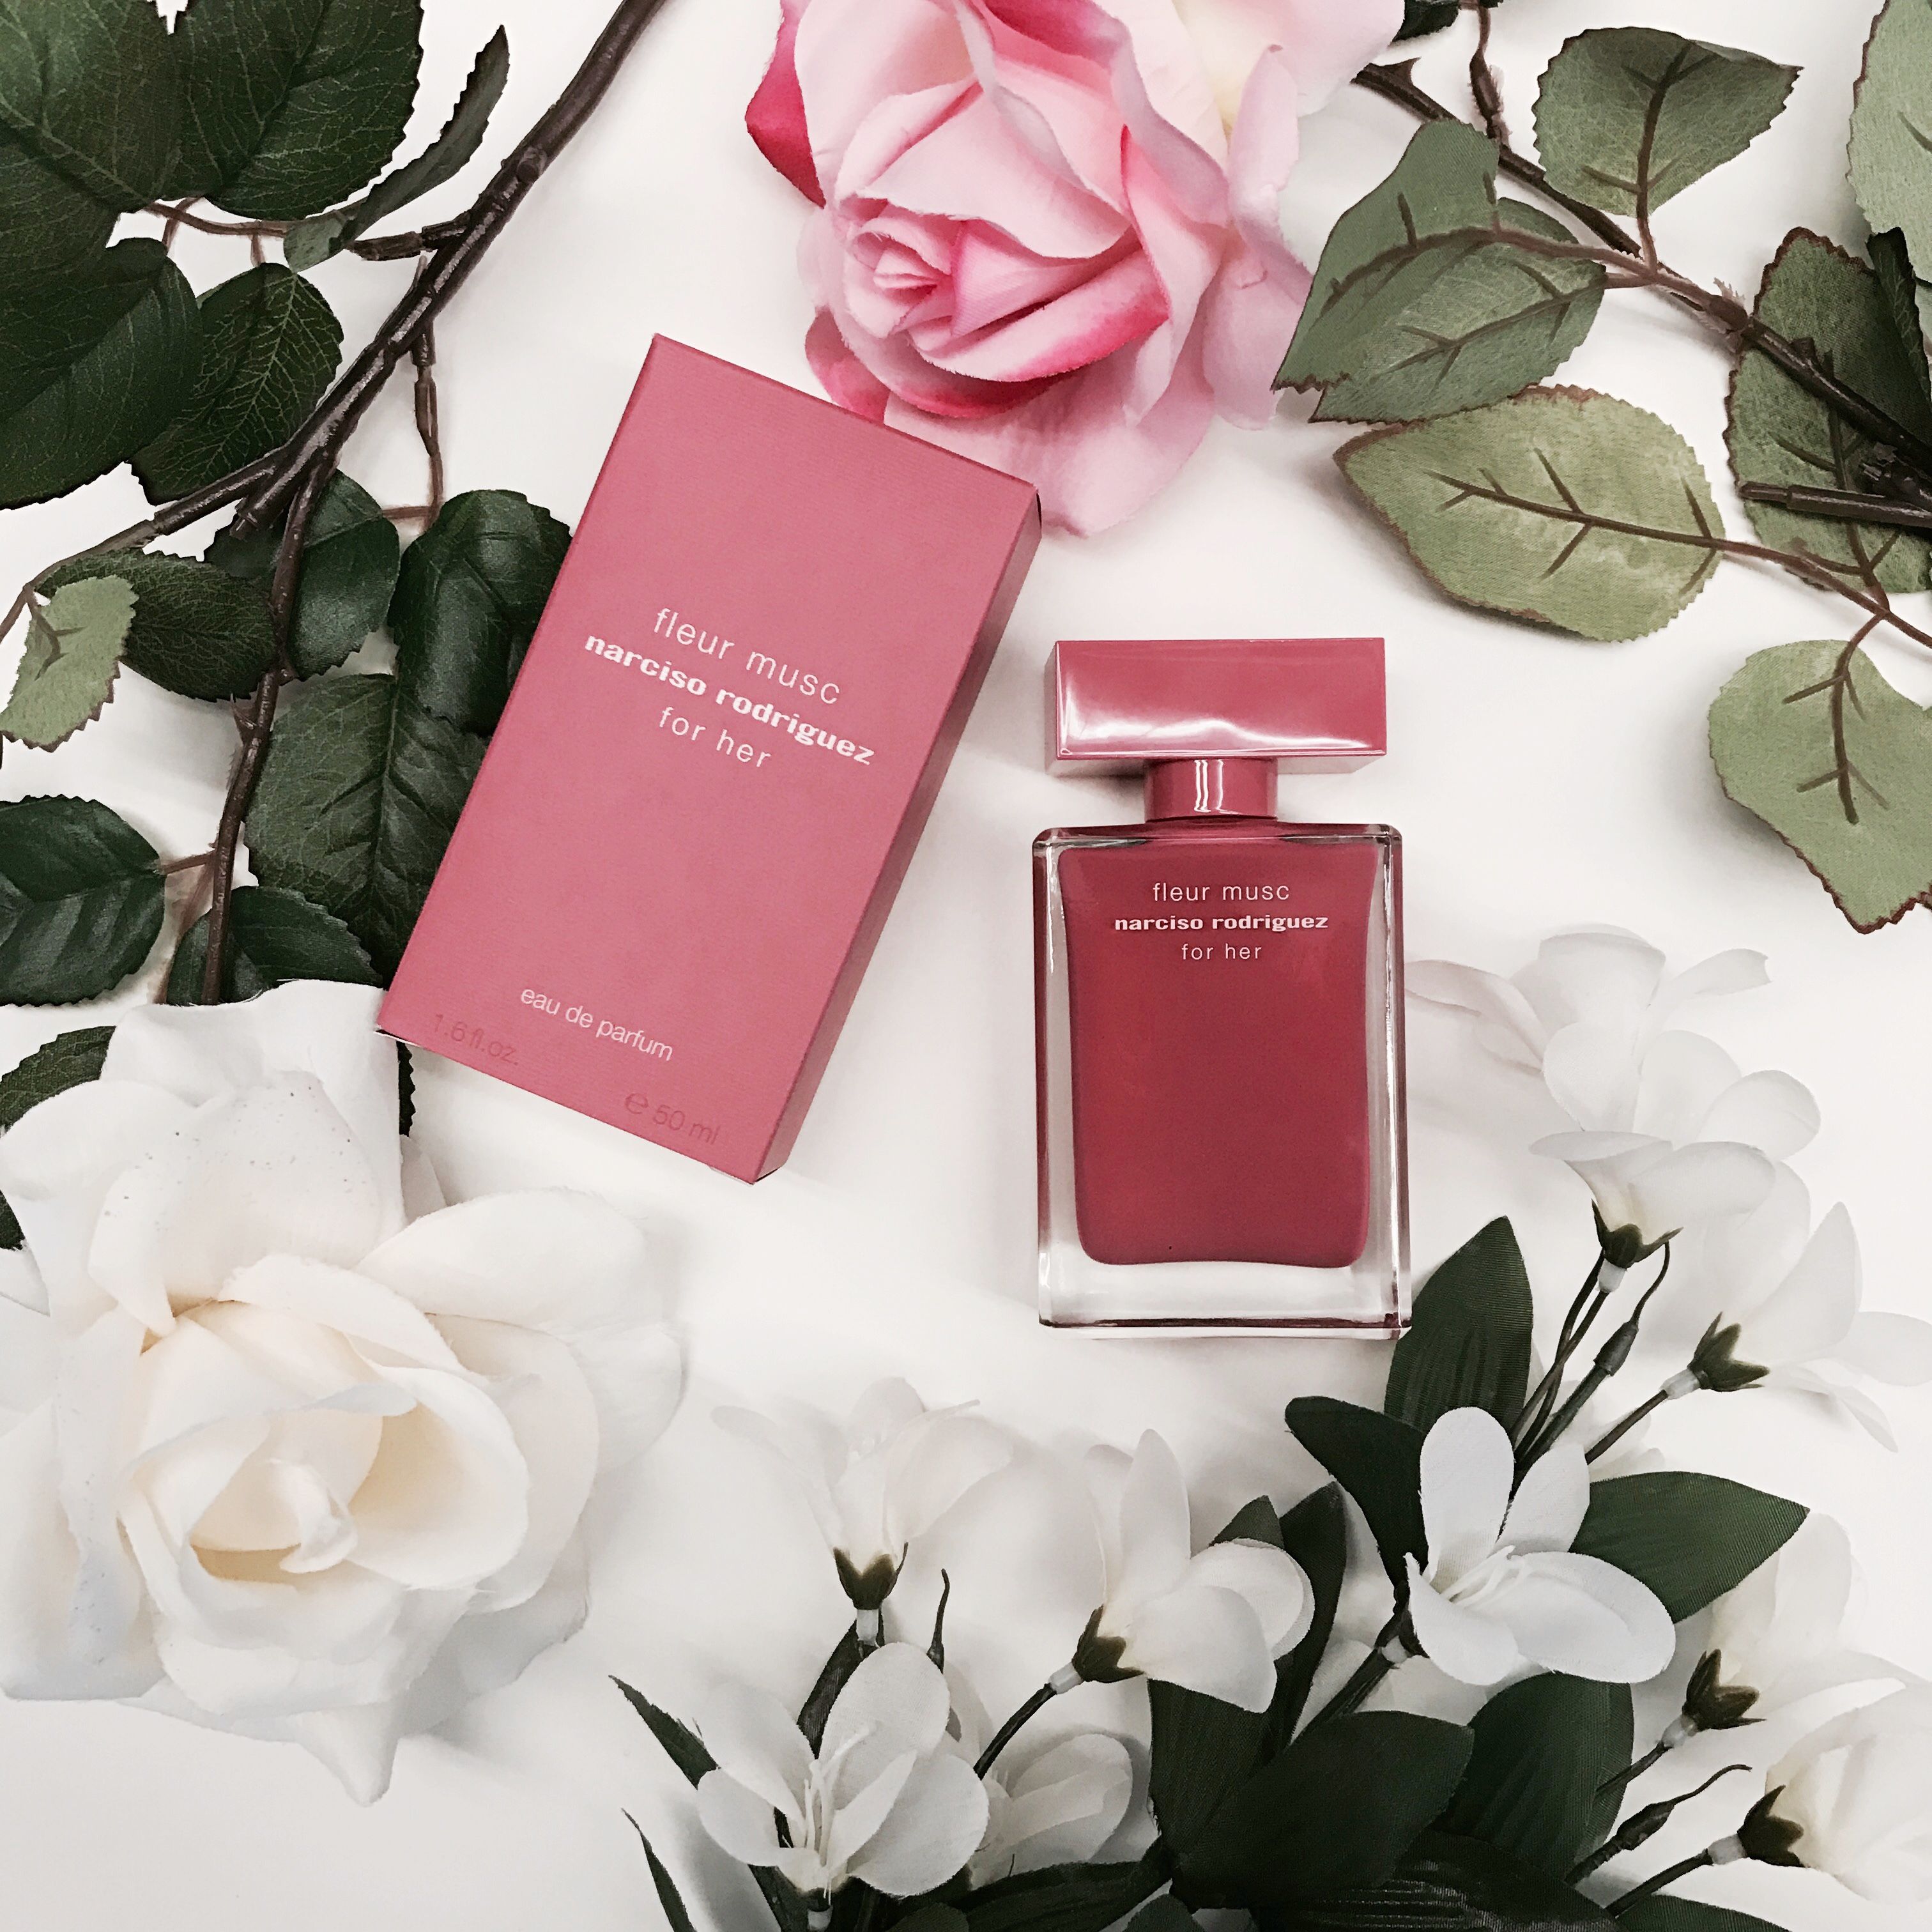 Narciso Rodriguez, Narciso Rodriguez Fleur Musc For Her, Narciso Rodriguez Fleur Musc For Her รีวิว, Narciso Rodriguez Fleur Musc For Her ราคา, Narciso Rodriguez Fleur Musc For Her review, Narciso Rodriguez Fleur Musc For Her EDP, Narciso Rodriguez Fleur Musc For Her EDP รีวิว